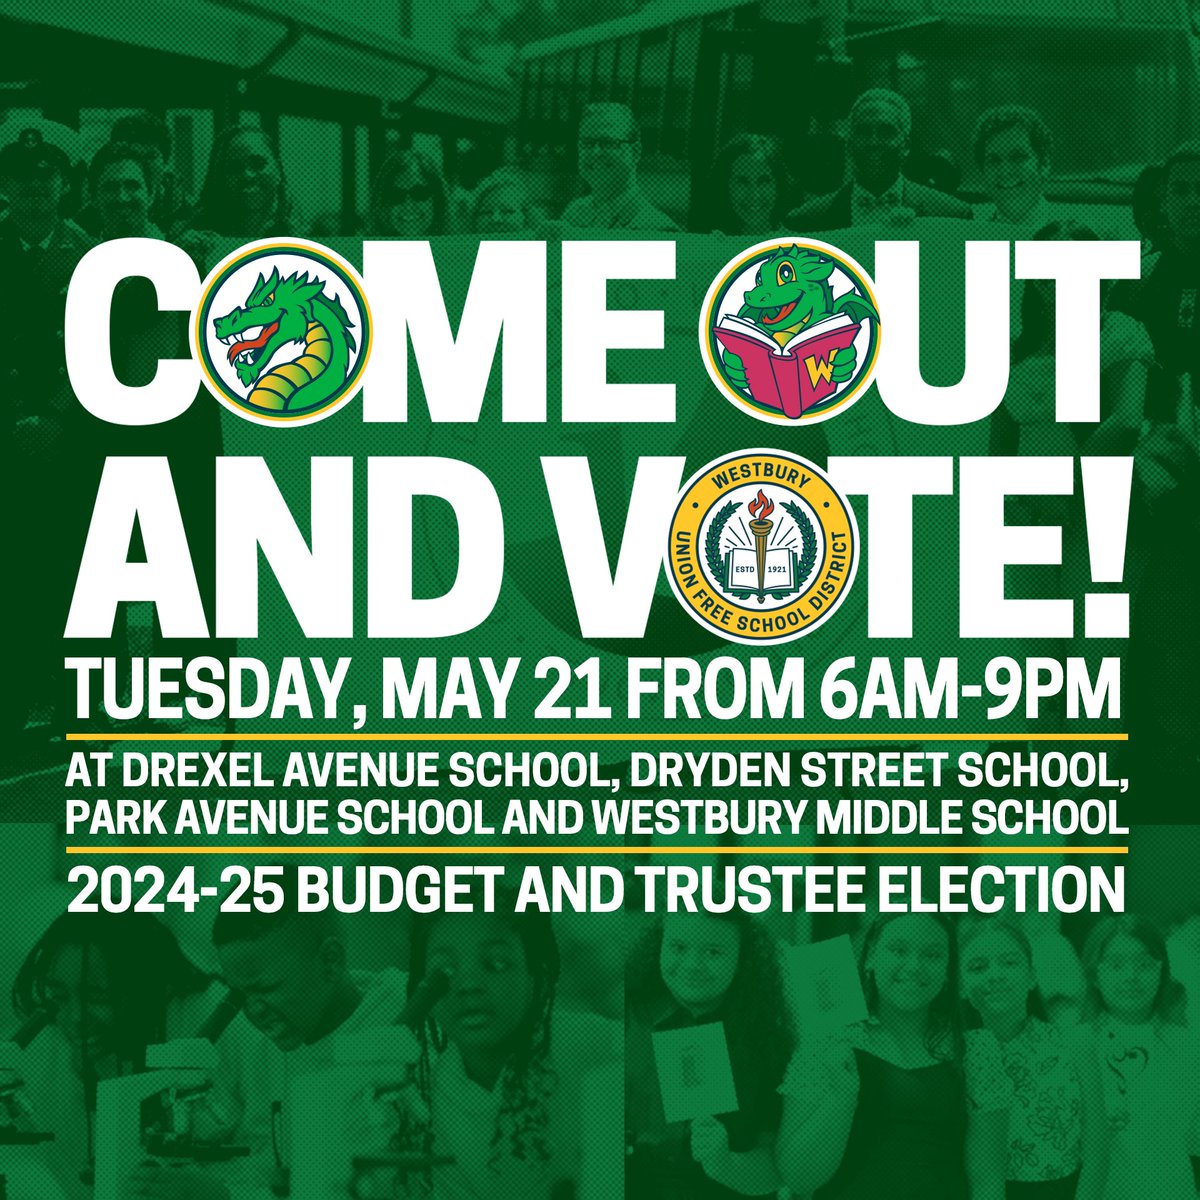 Vote in the 2024-25 budget and trustee election on Tuesday, May 21 from 6 AM to 9 PM at the following locations: - Drexel Avenue School - Dryden Street School - Park Avenue School - Westbury Middle School